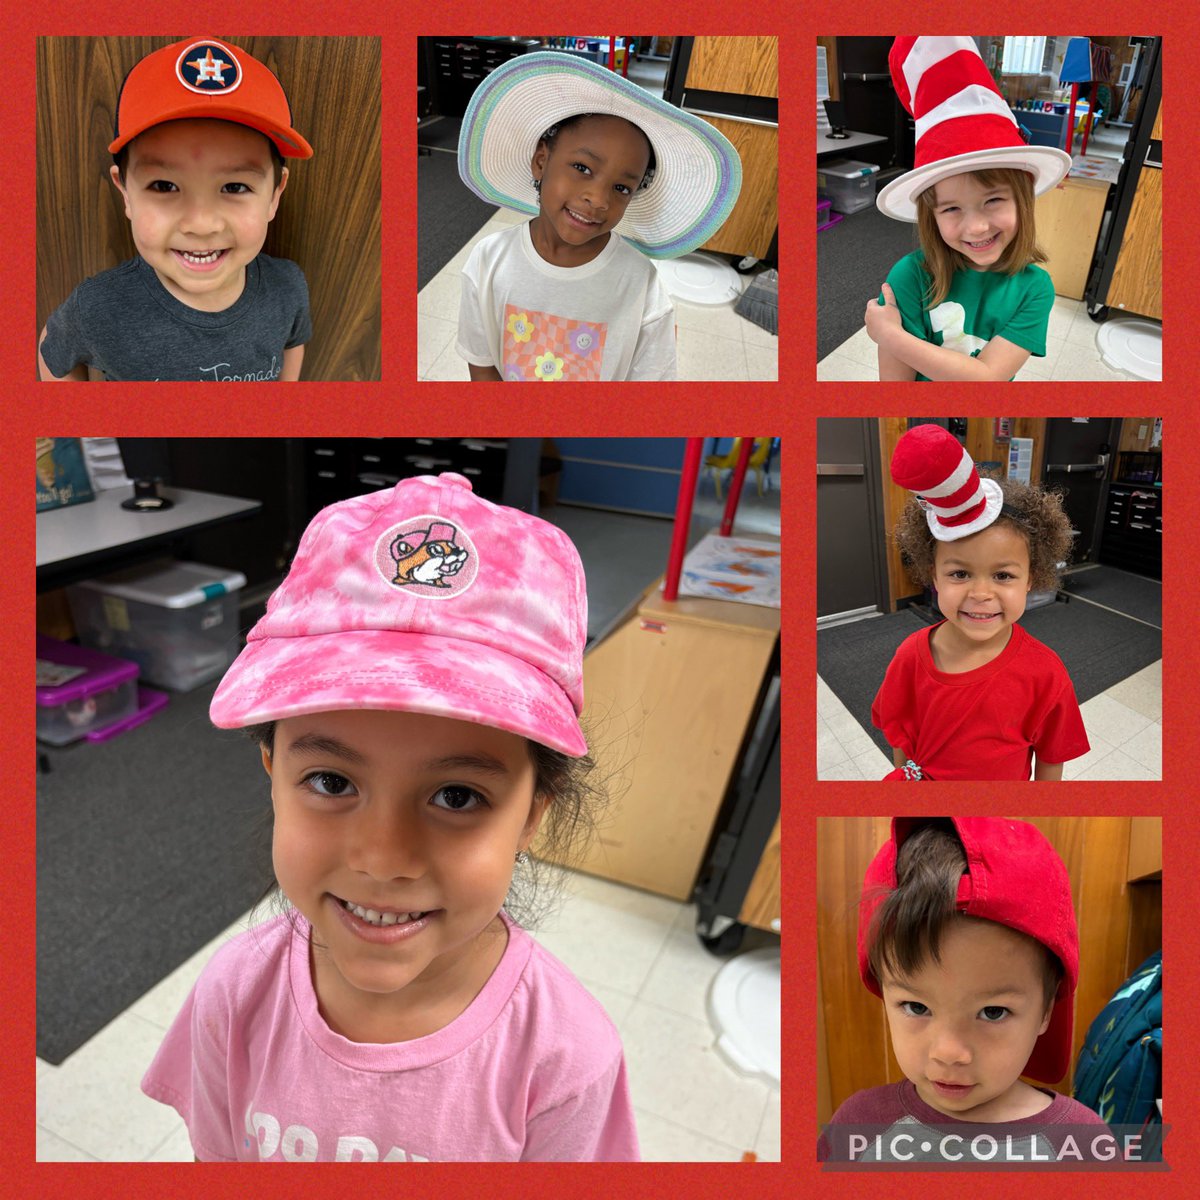 Read Across America Week @Barker_ELC! Hats Off to Reading. Thank you Edith Patel @PatelsClass for reading to our little learners today. They loved Pete the Cat and cupcakes for snack. #ReadAcrossAmerica #hatsofftoreading #happybirthdayDrSeuss #guestreader #CFISDELCS